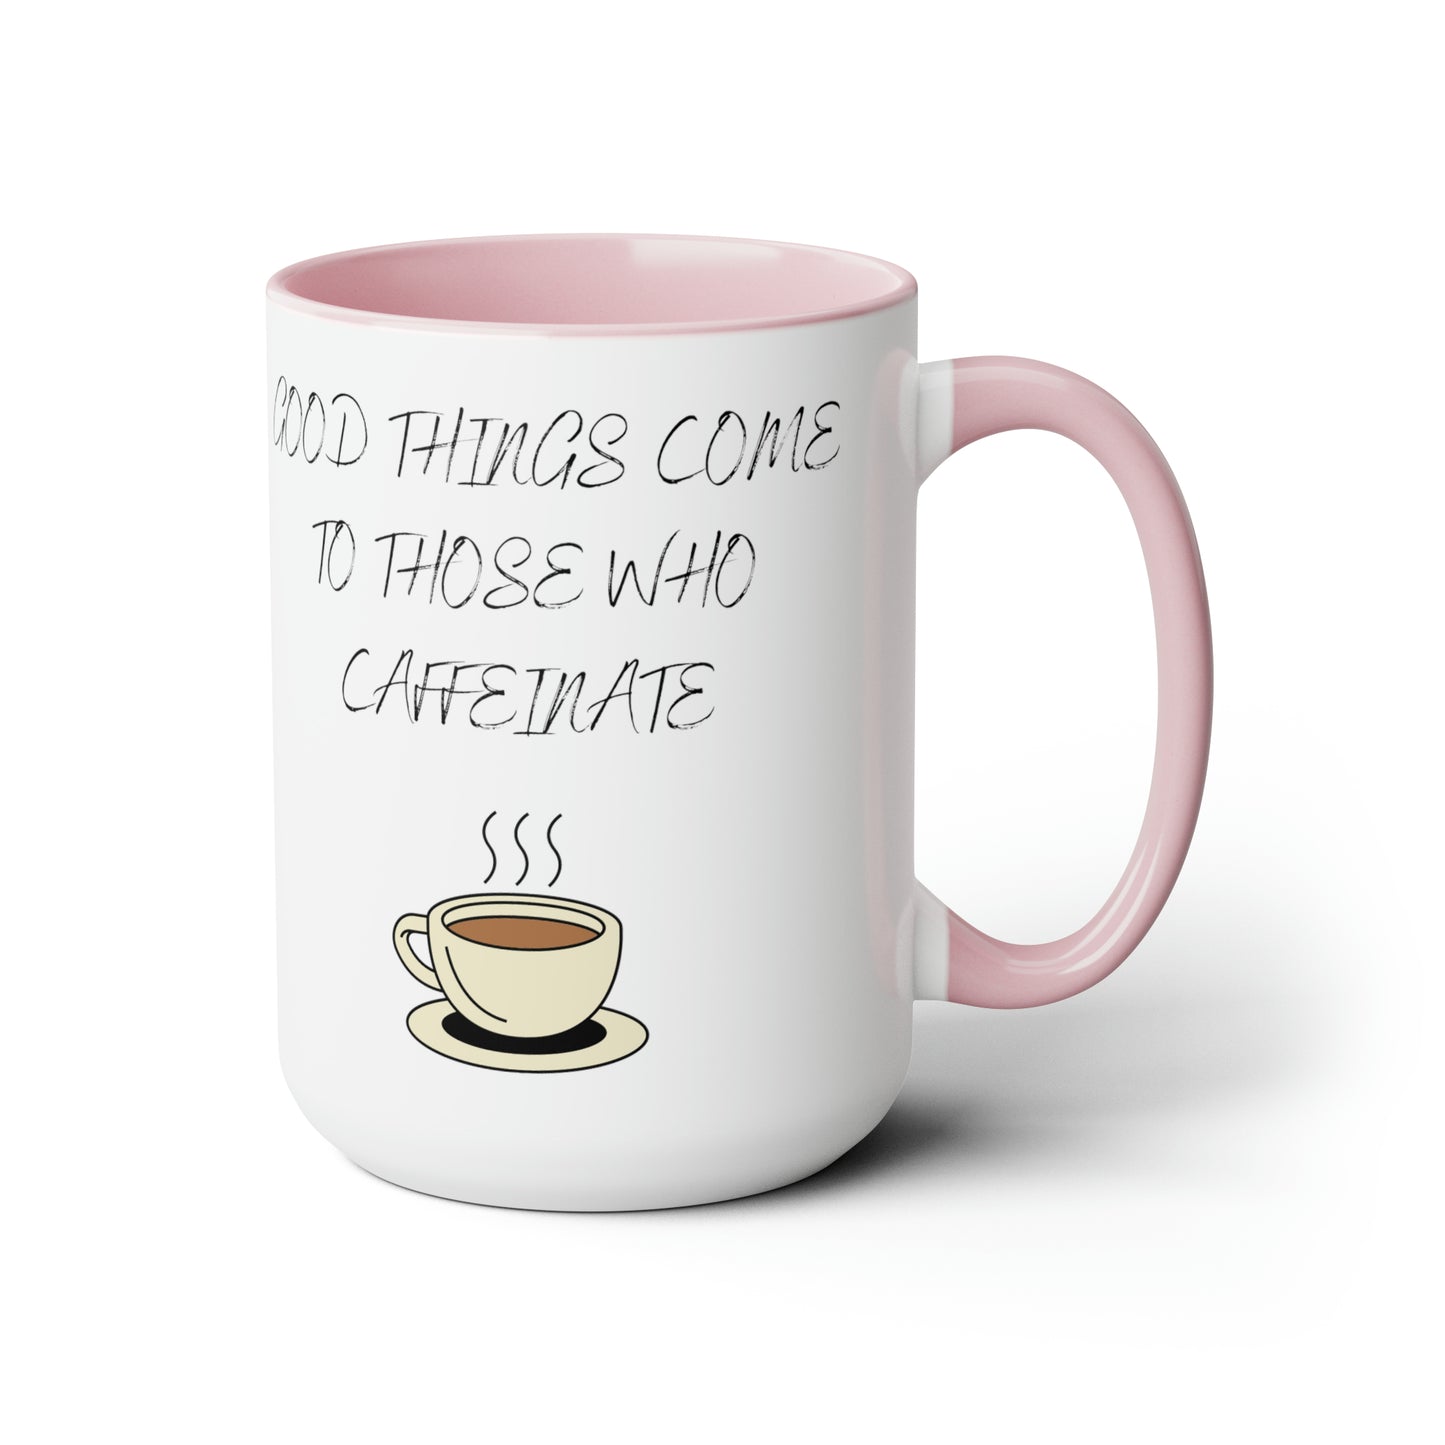 Good things come to those who caffeinate